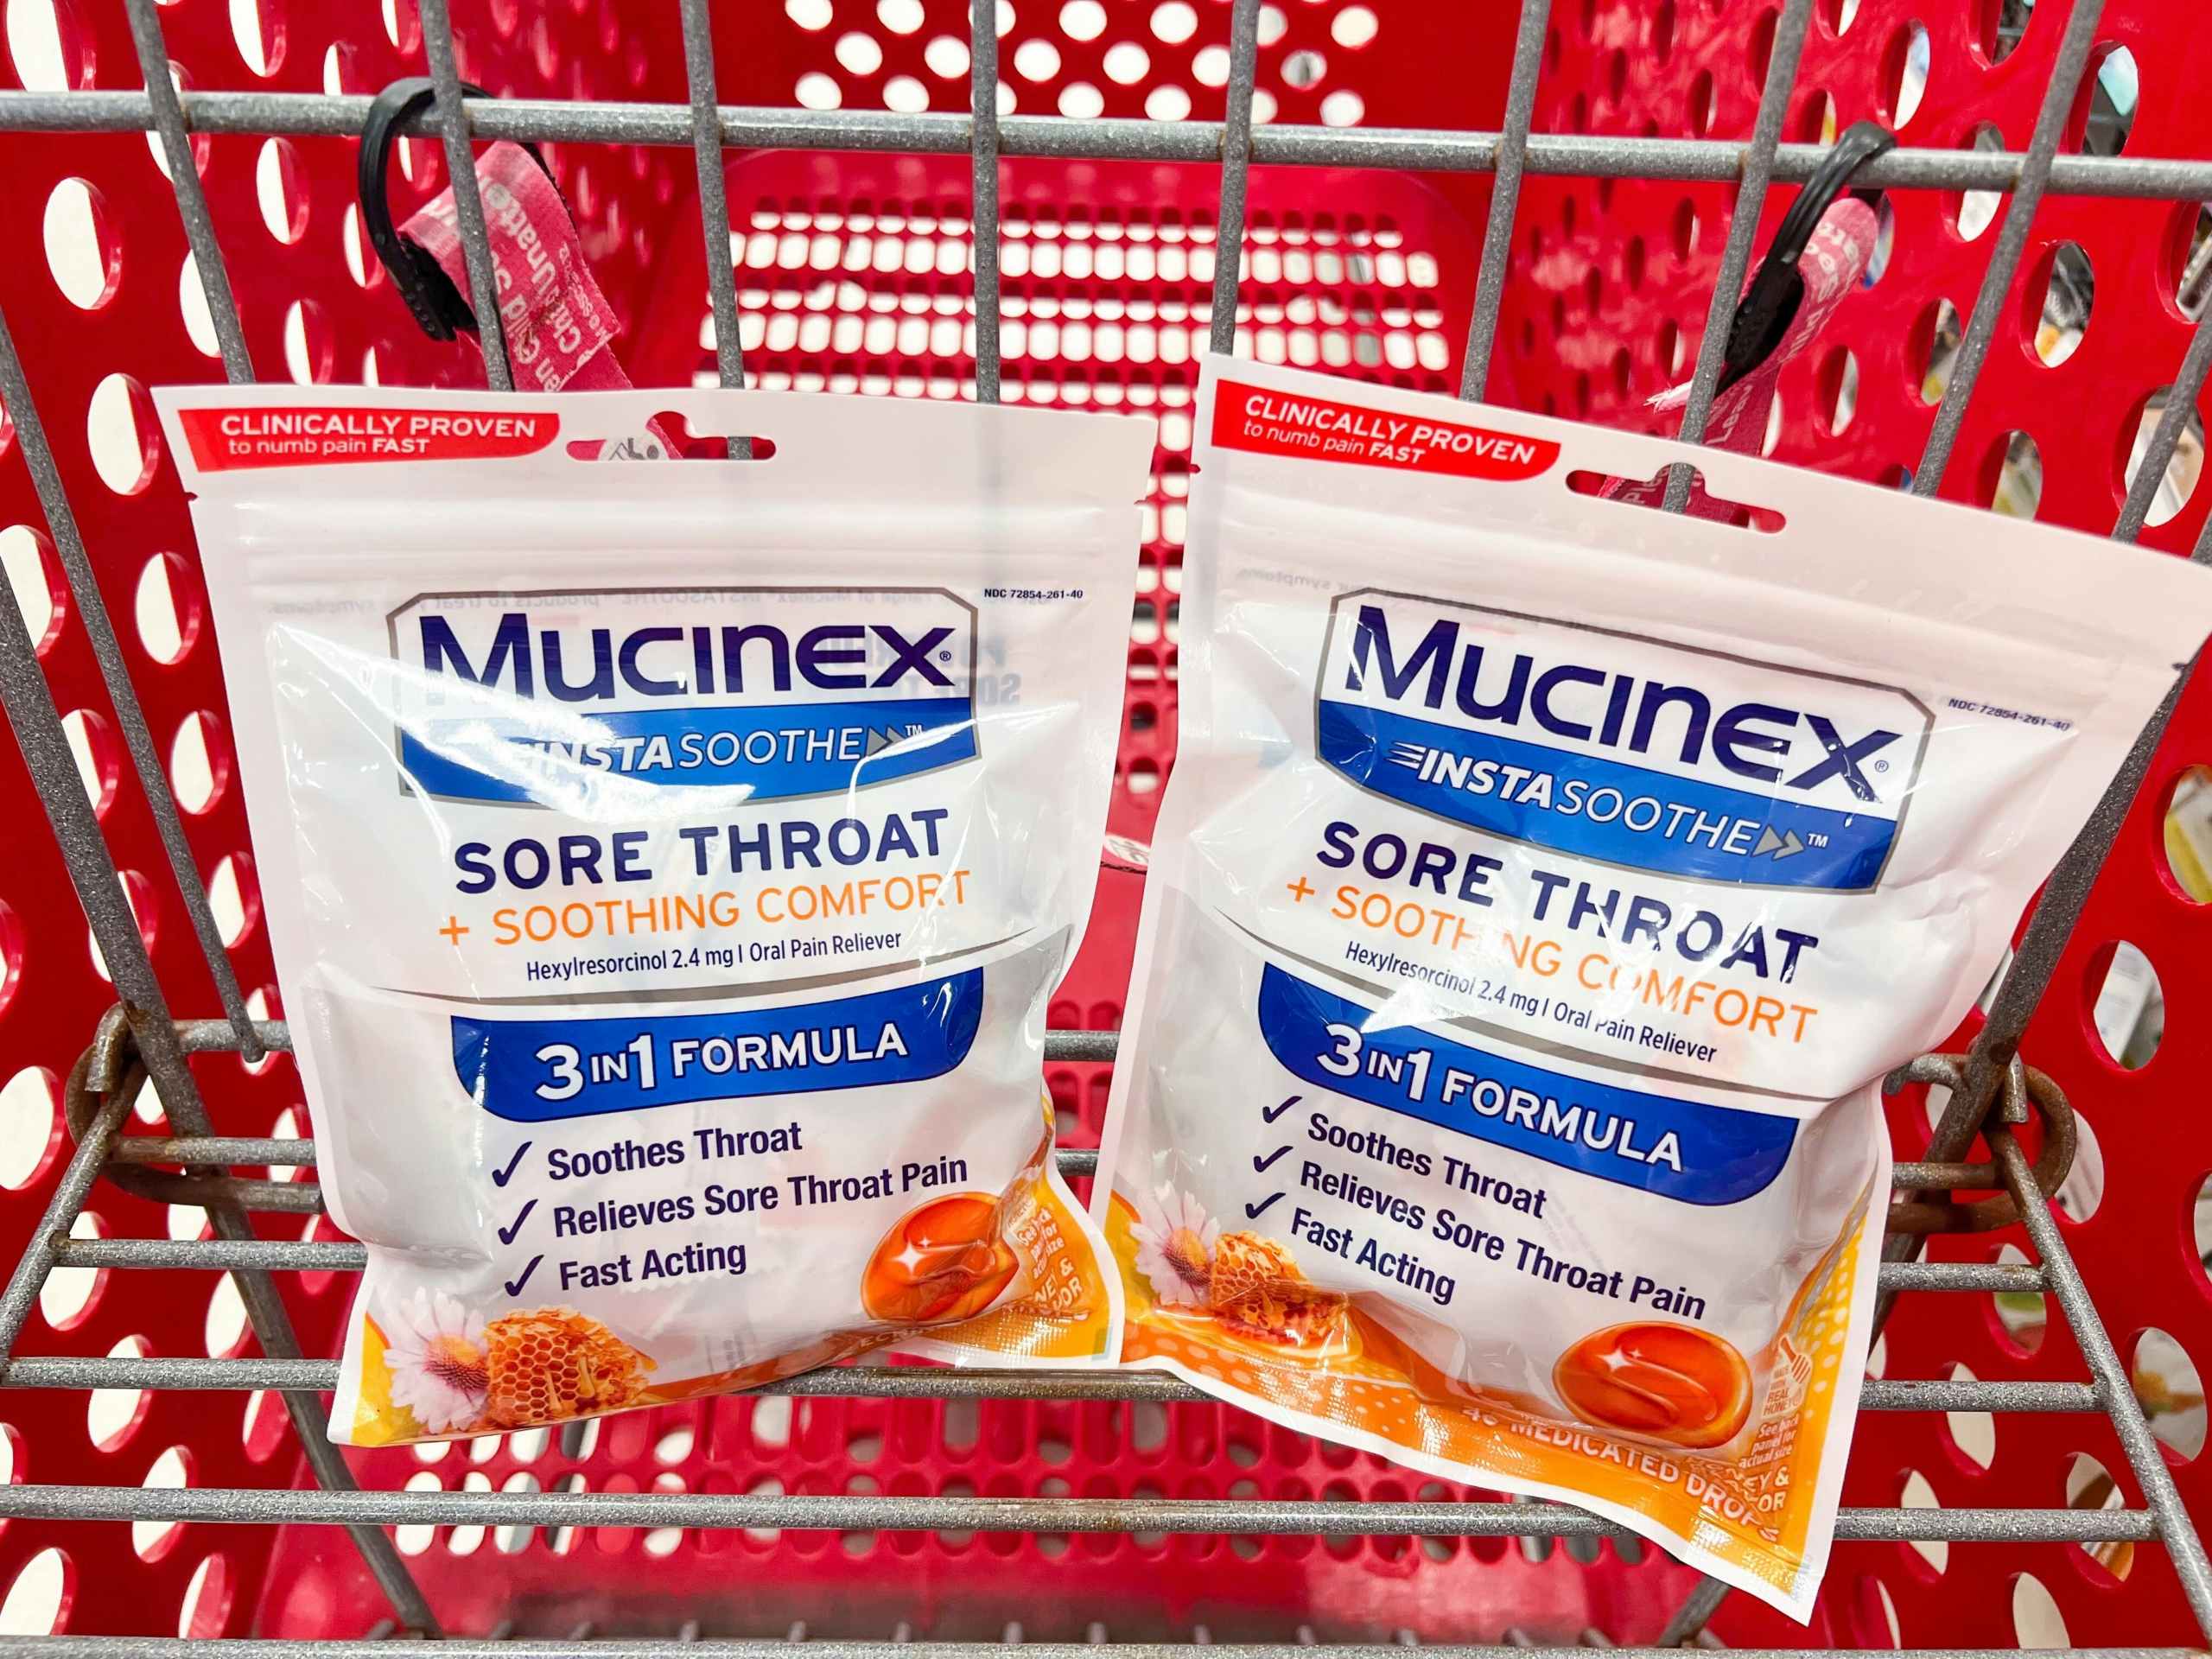 two bags of mucinex cough drops in cart